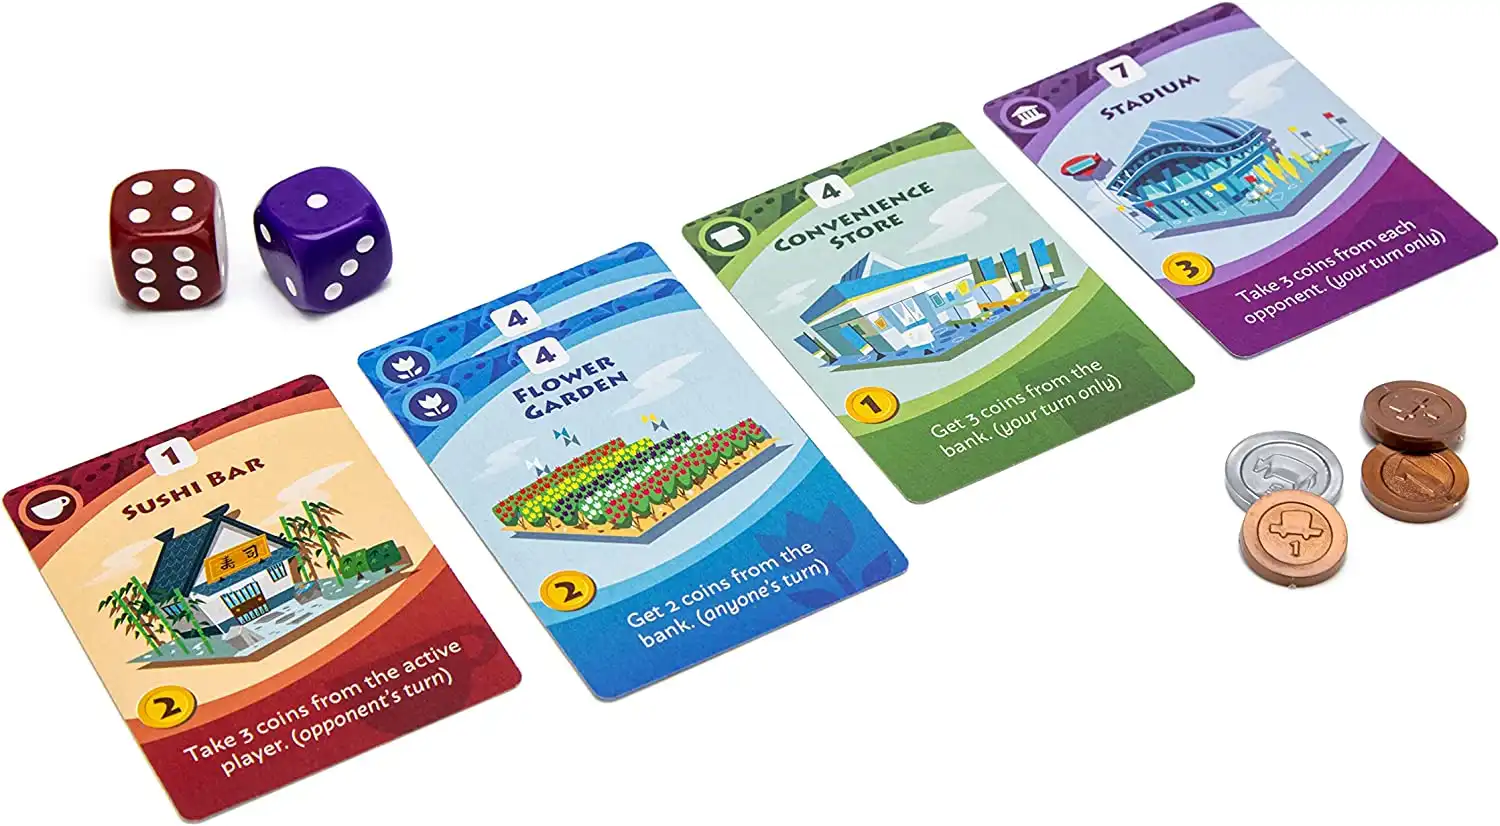 Machi Koro 2 (2021) board game cards, coins and dices | Source: Pandasaurus Game